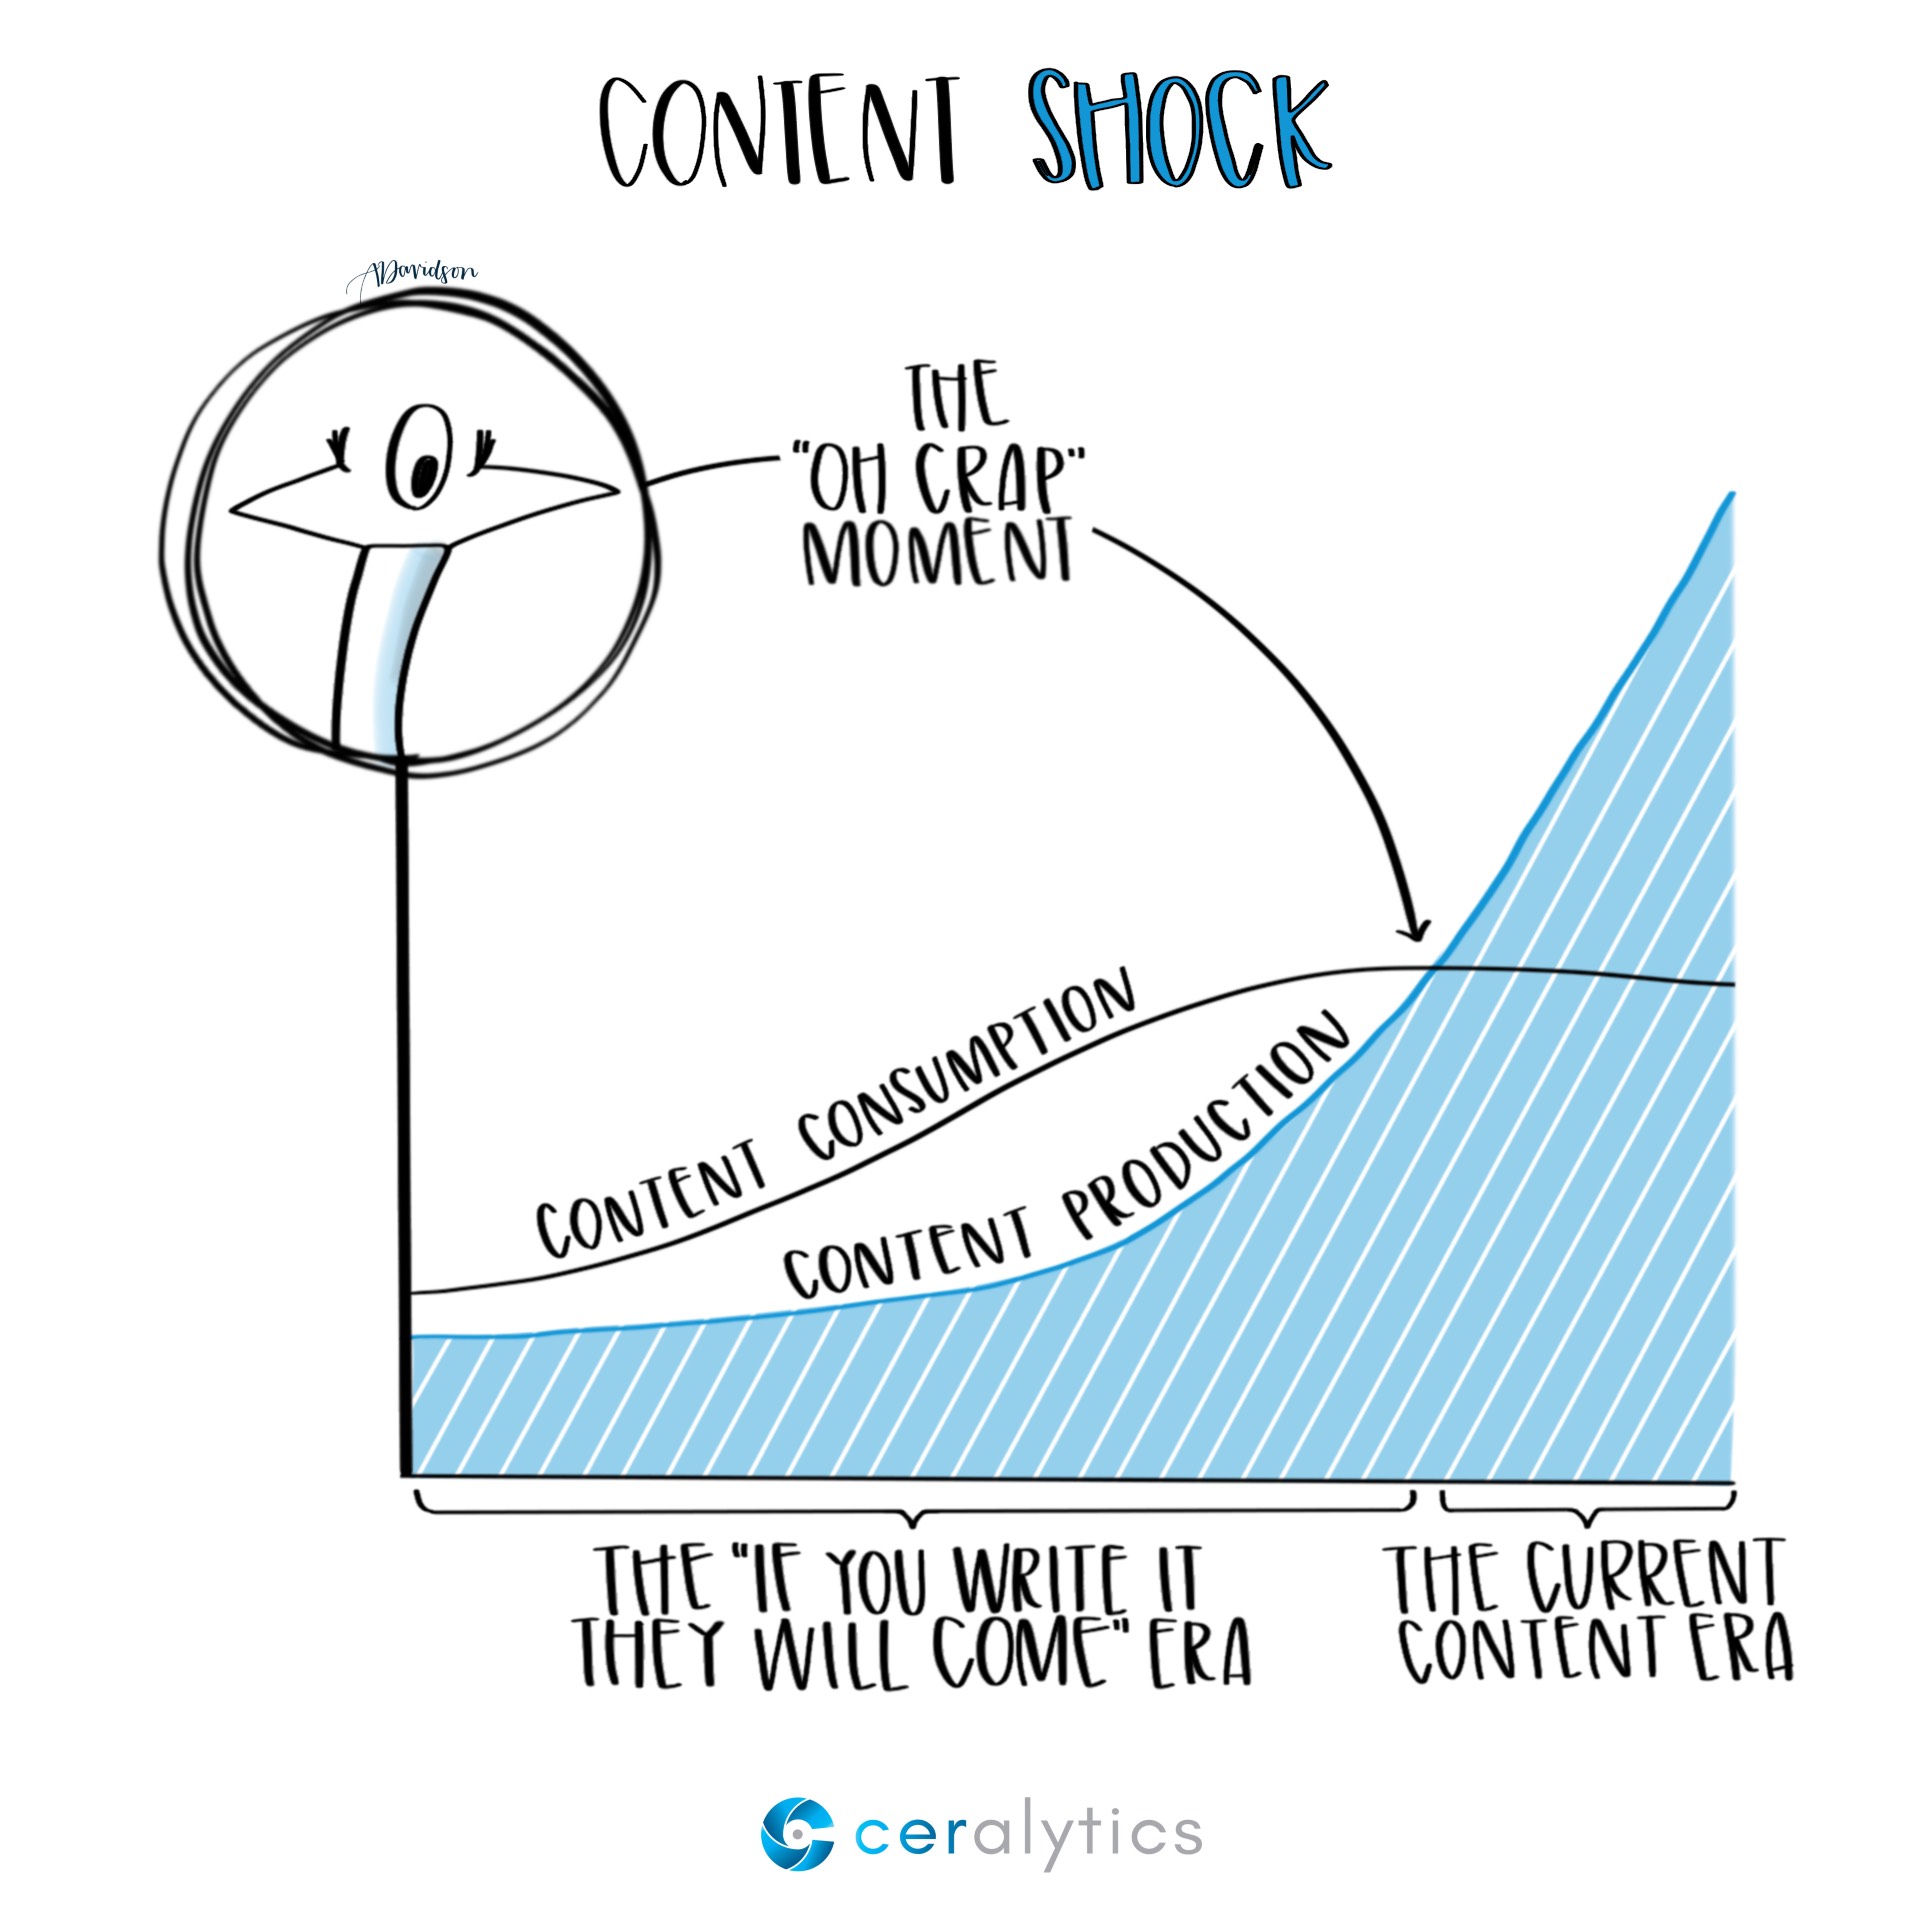 What is content shock